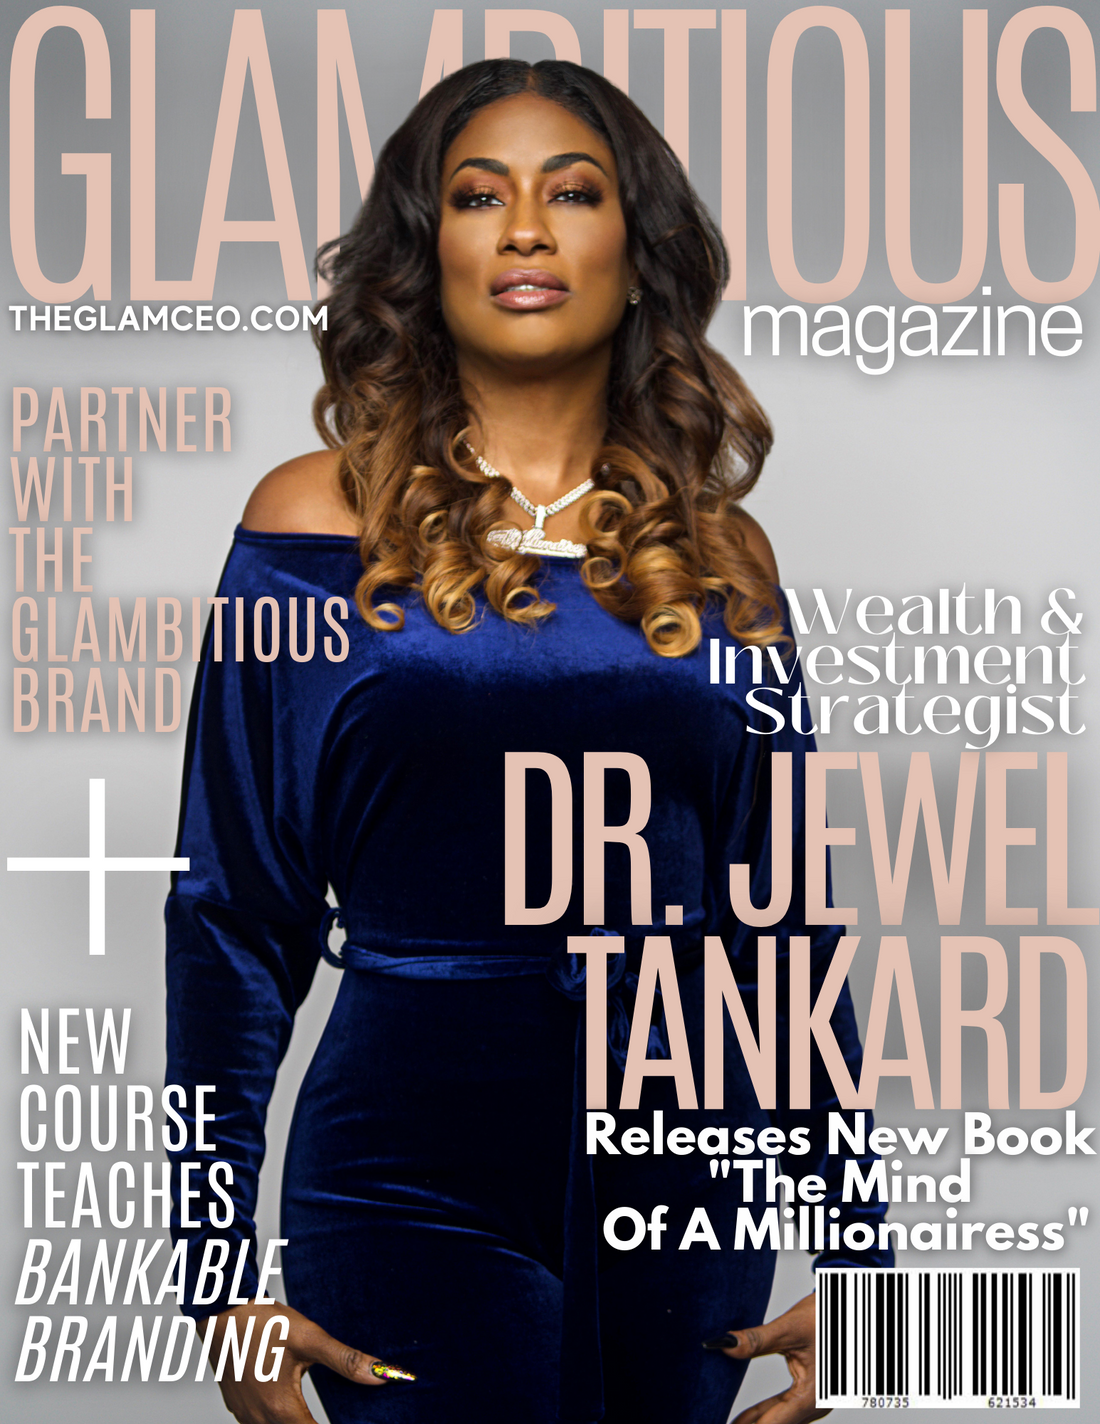 Dr. Jewel Tankard Releases "The Mind of a Millionairess"